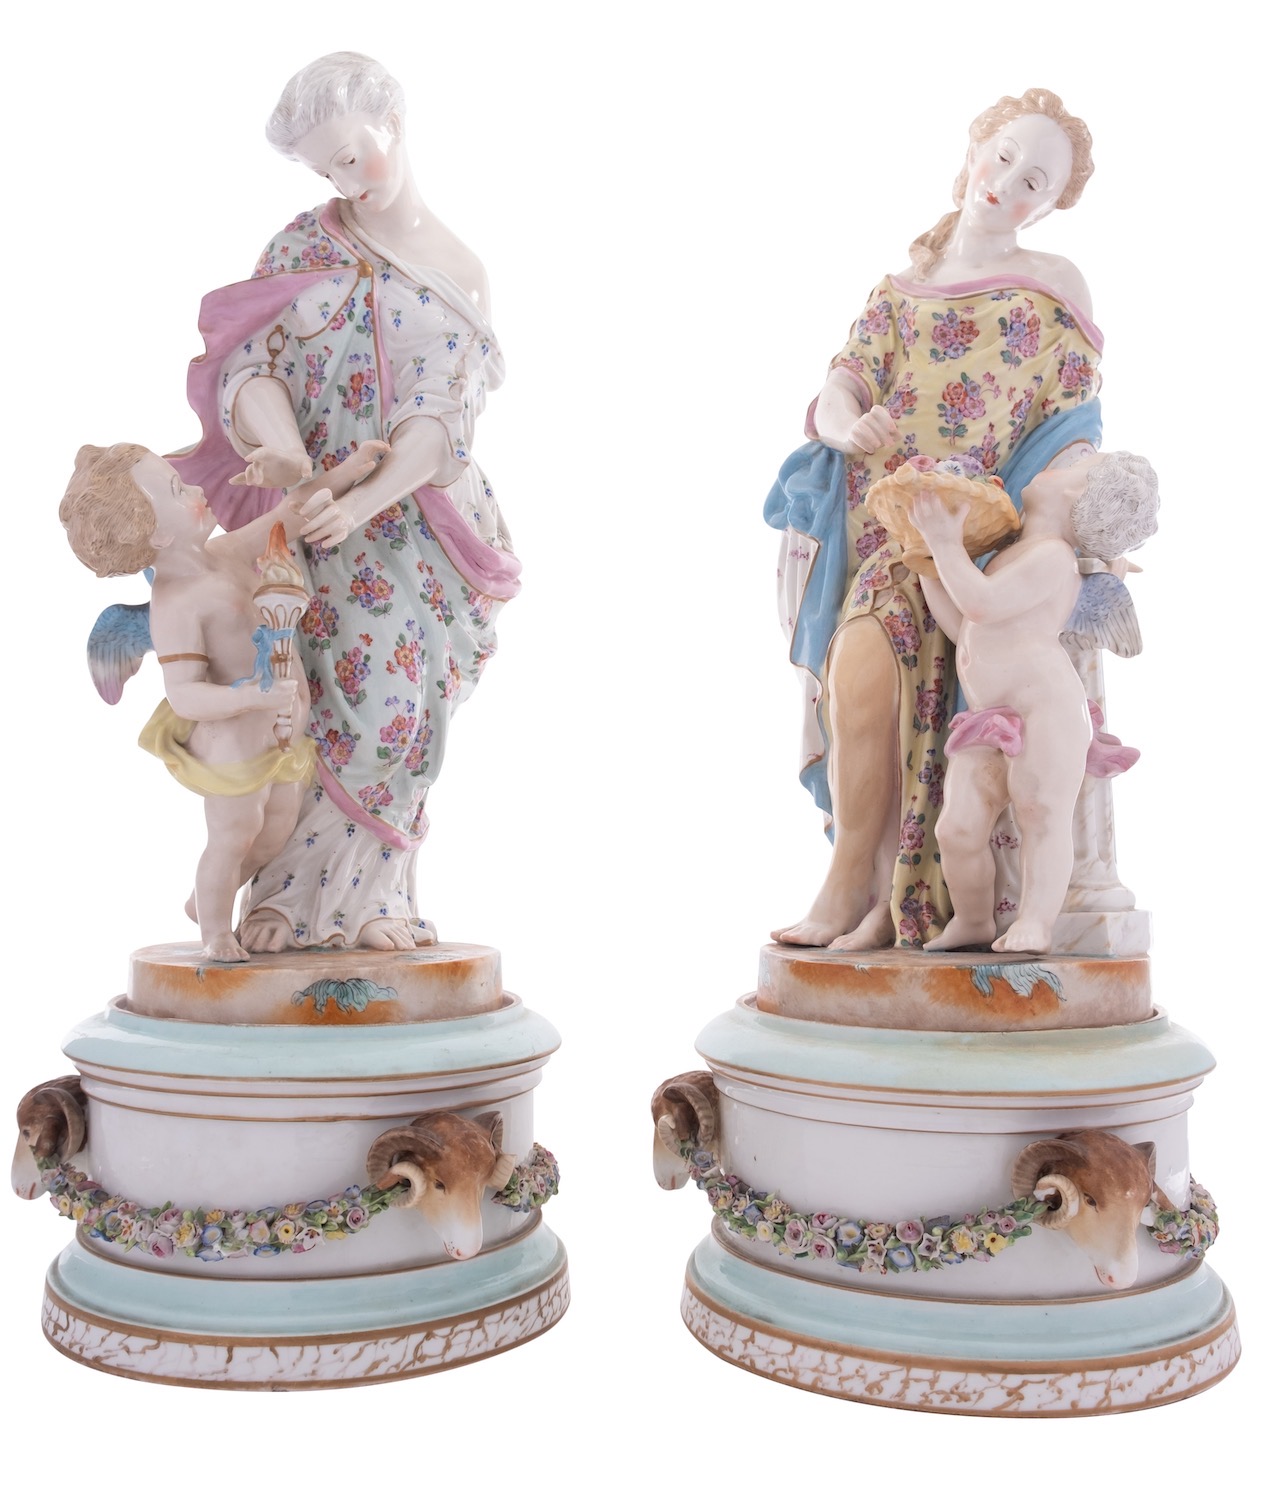 A pair of French porcelain figure groups and stands in the form of classical female figures